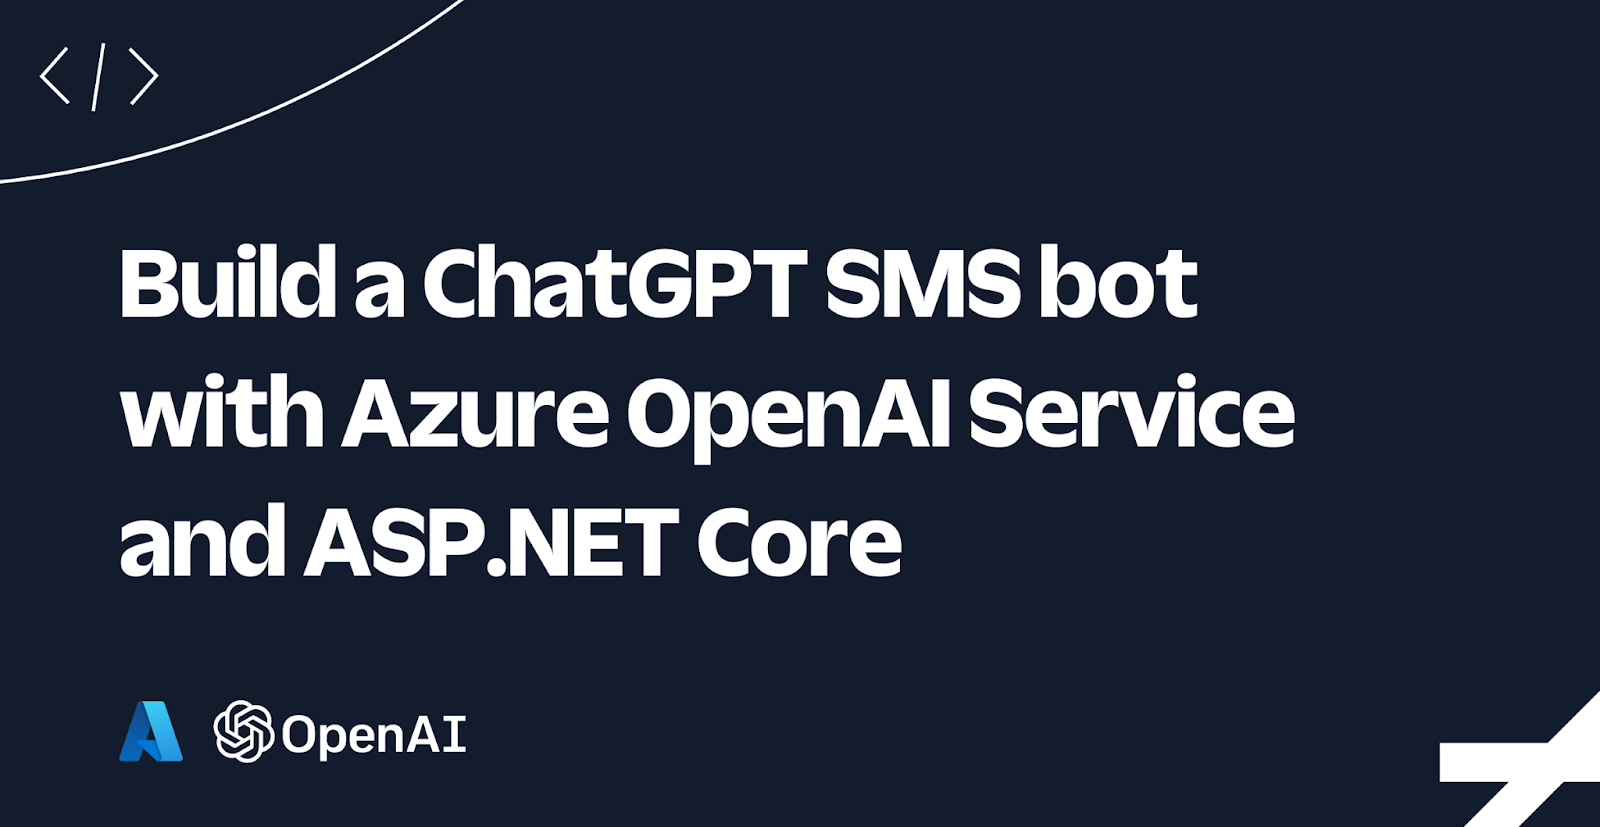 Build a ChatGPT SMS bot with Azure OpenAI Service and ASP.NET Core